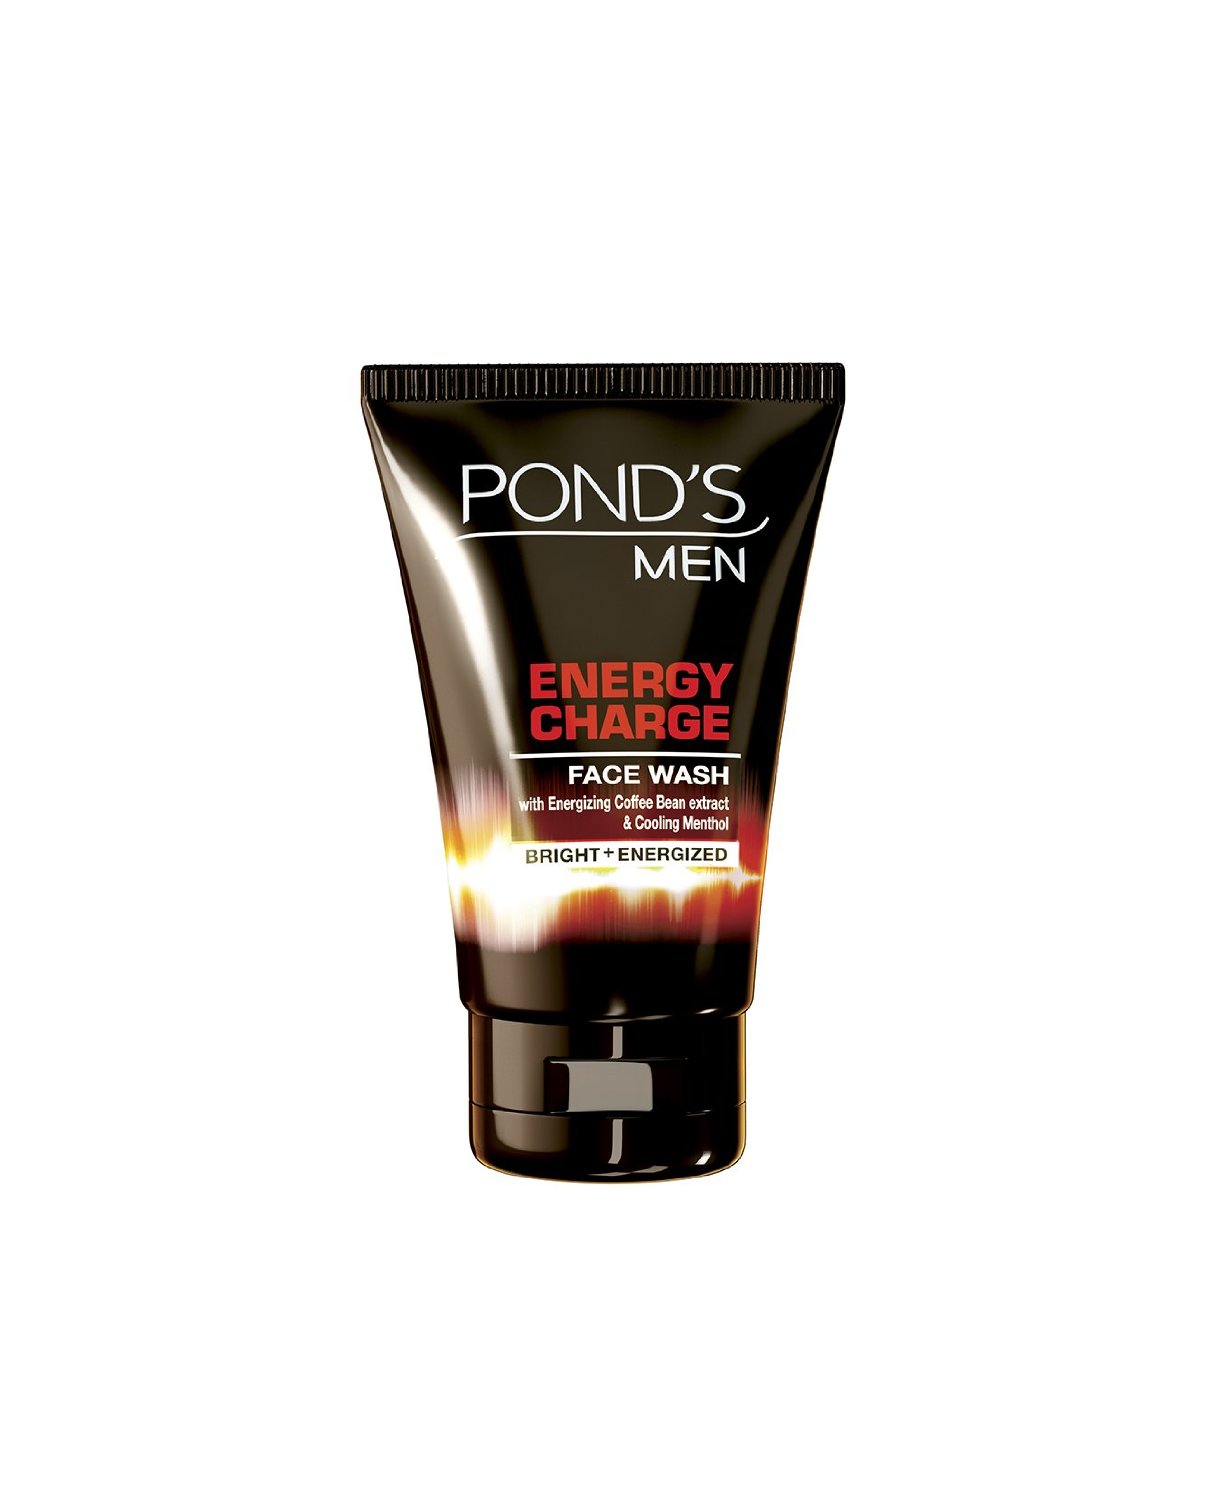 Best Face Wash for Men in India - Ponds Energy Charge Face Wash